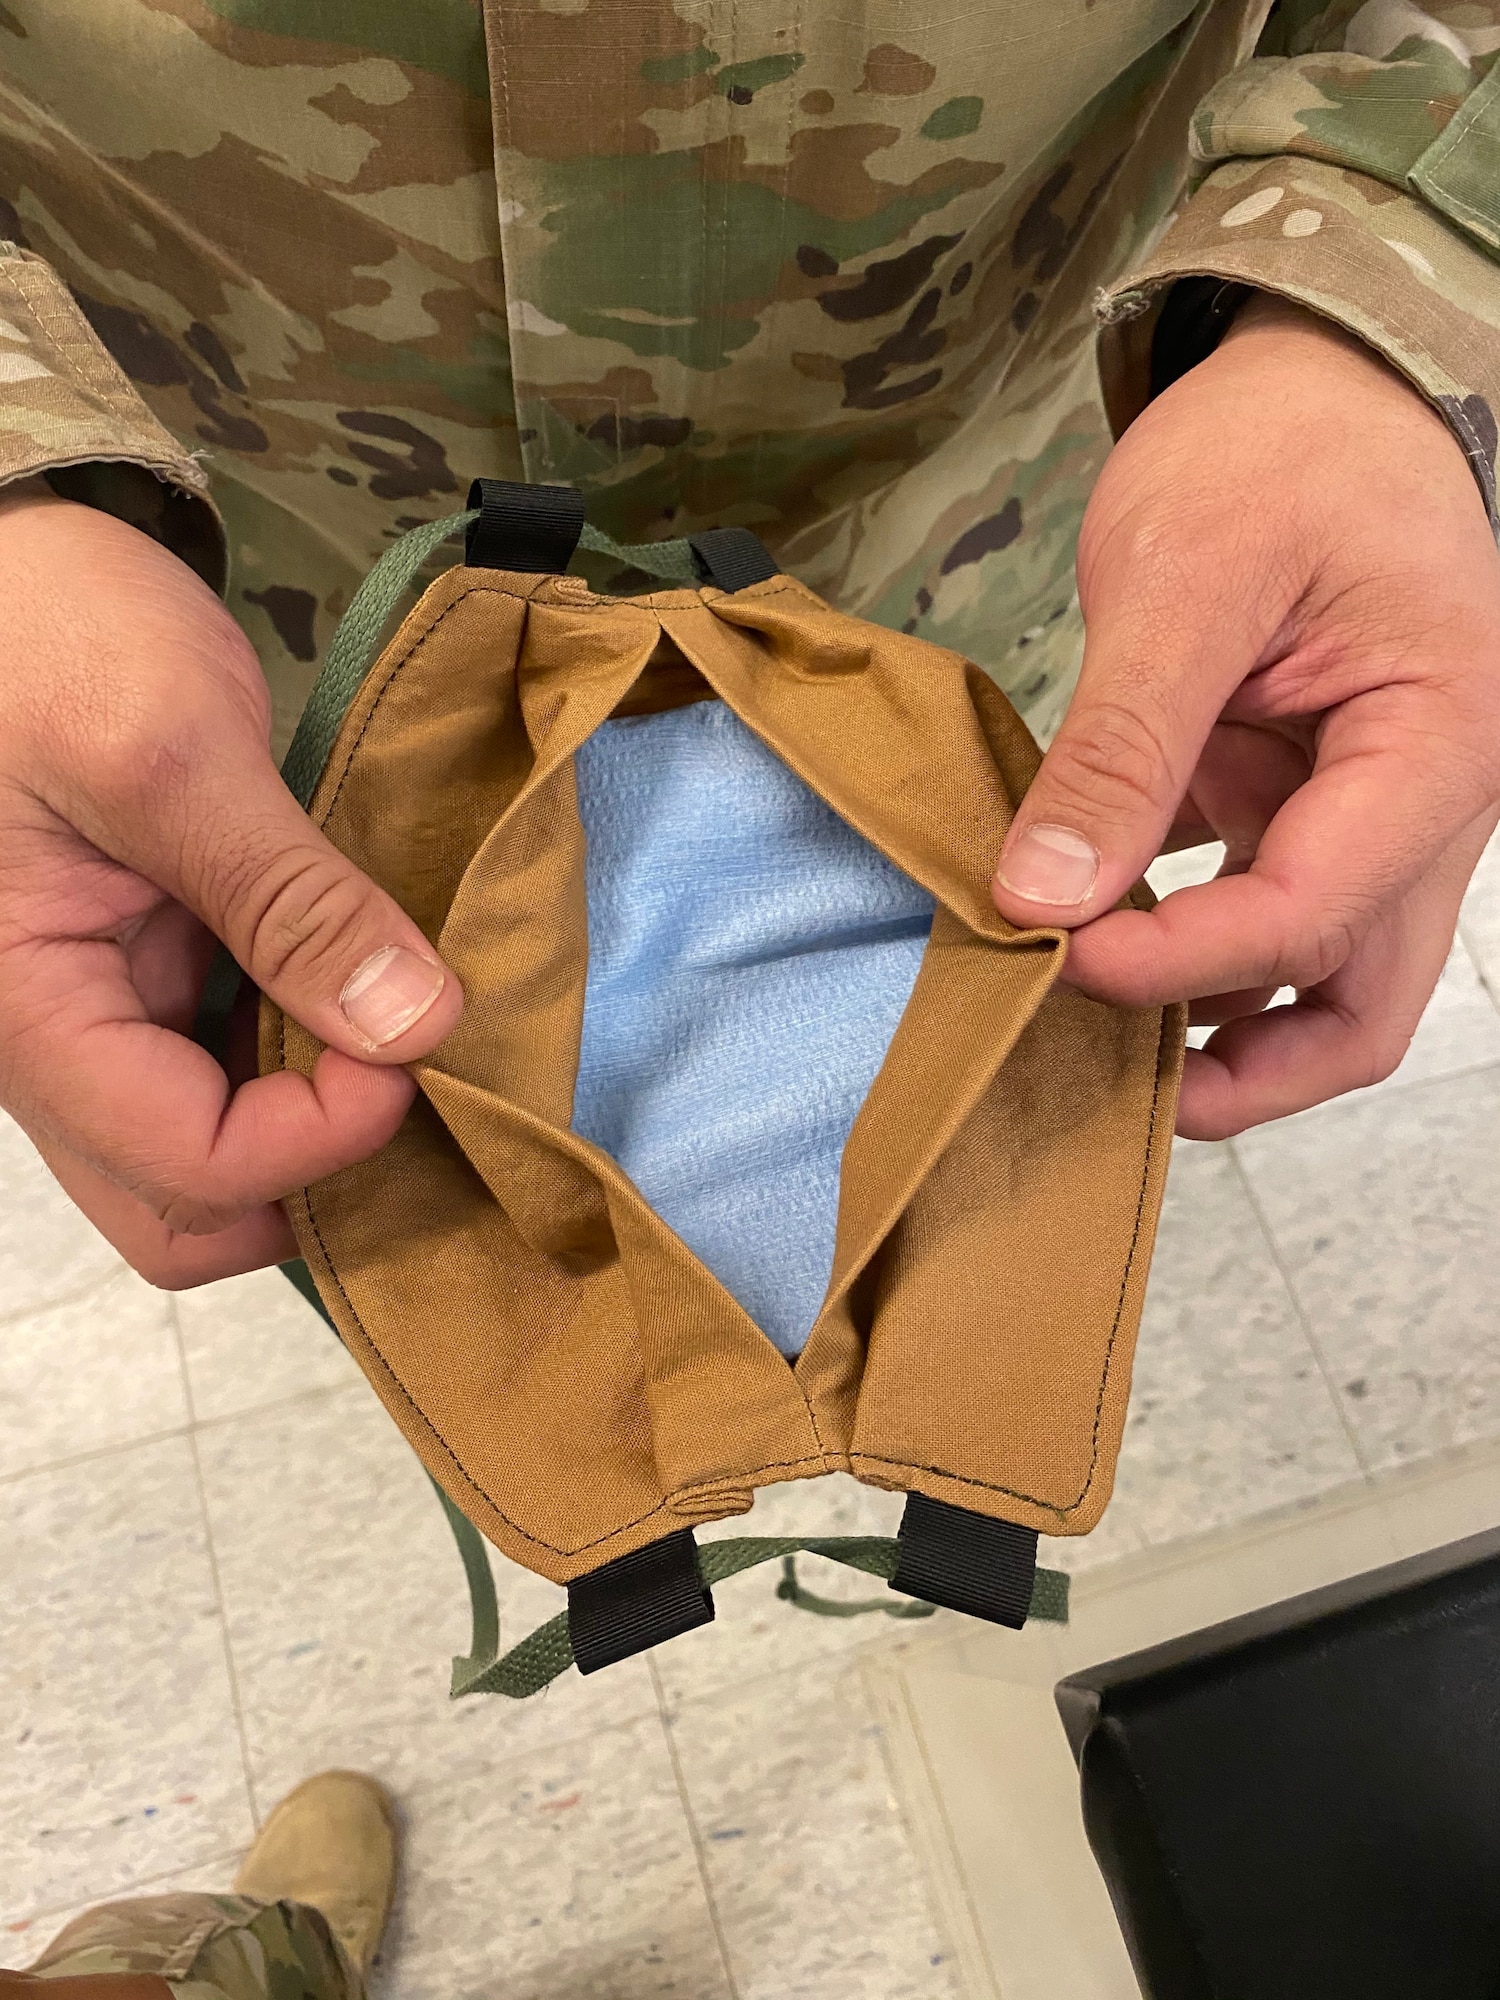 A cloth mask is fabricated by an Airmen with 412th Operations Support Squadron, 412th Operations Group, 412th Test Wing, using available equipment in the Air Crew Flight Equipment section at Edwards Air Force Base, April 7. Although cloth masks don’t offer full protection from COVID-19, the CDC advises that a simple cloth covering can slow the spread of the virus and help people who may have the virus and not know it from spreading it to others. (Courtesy photo)